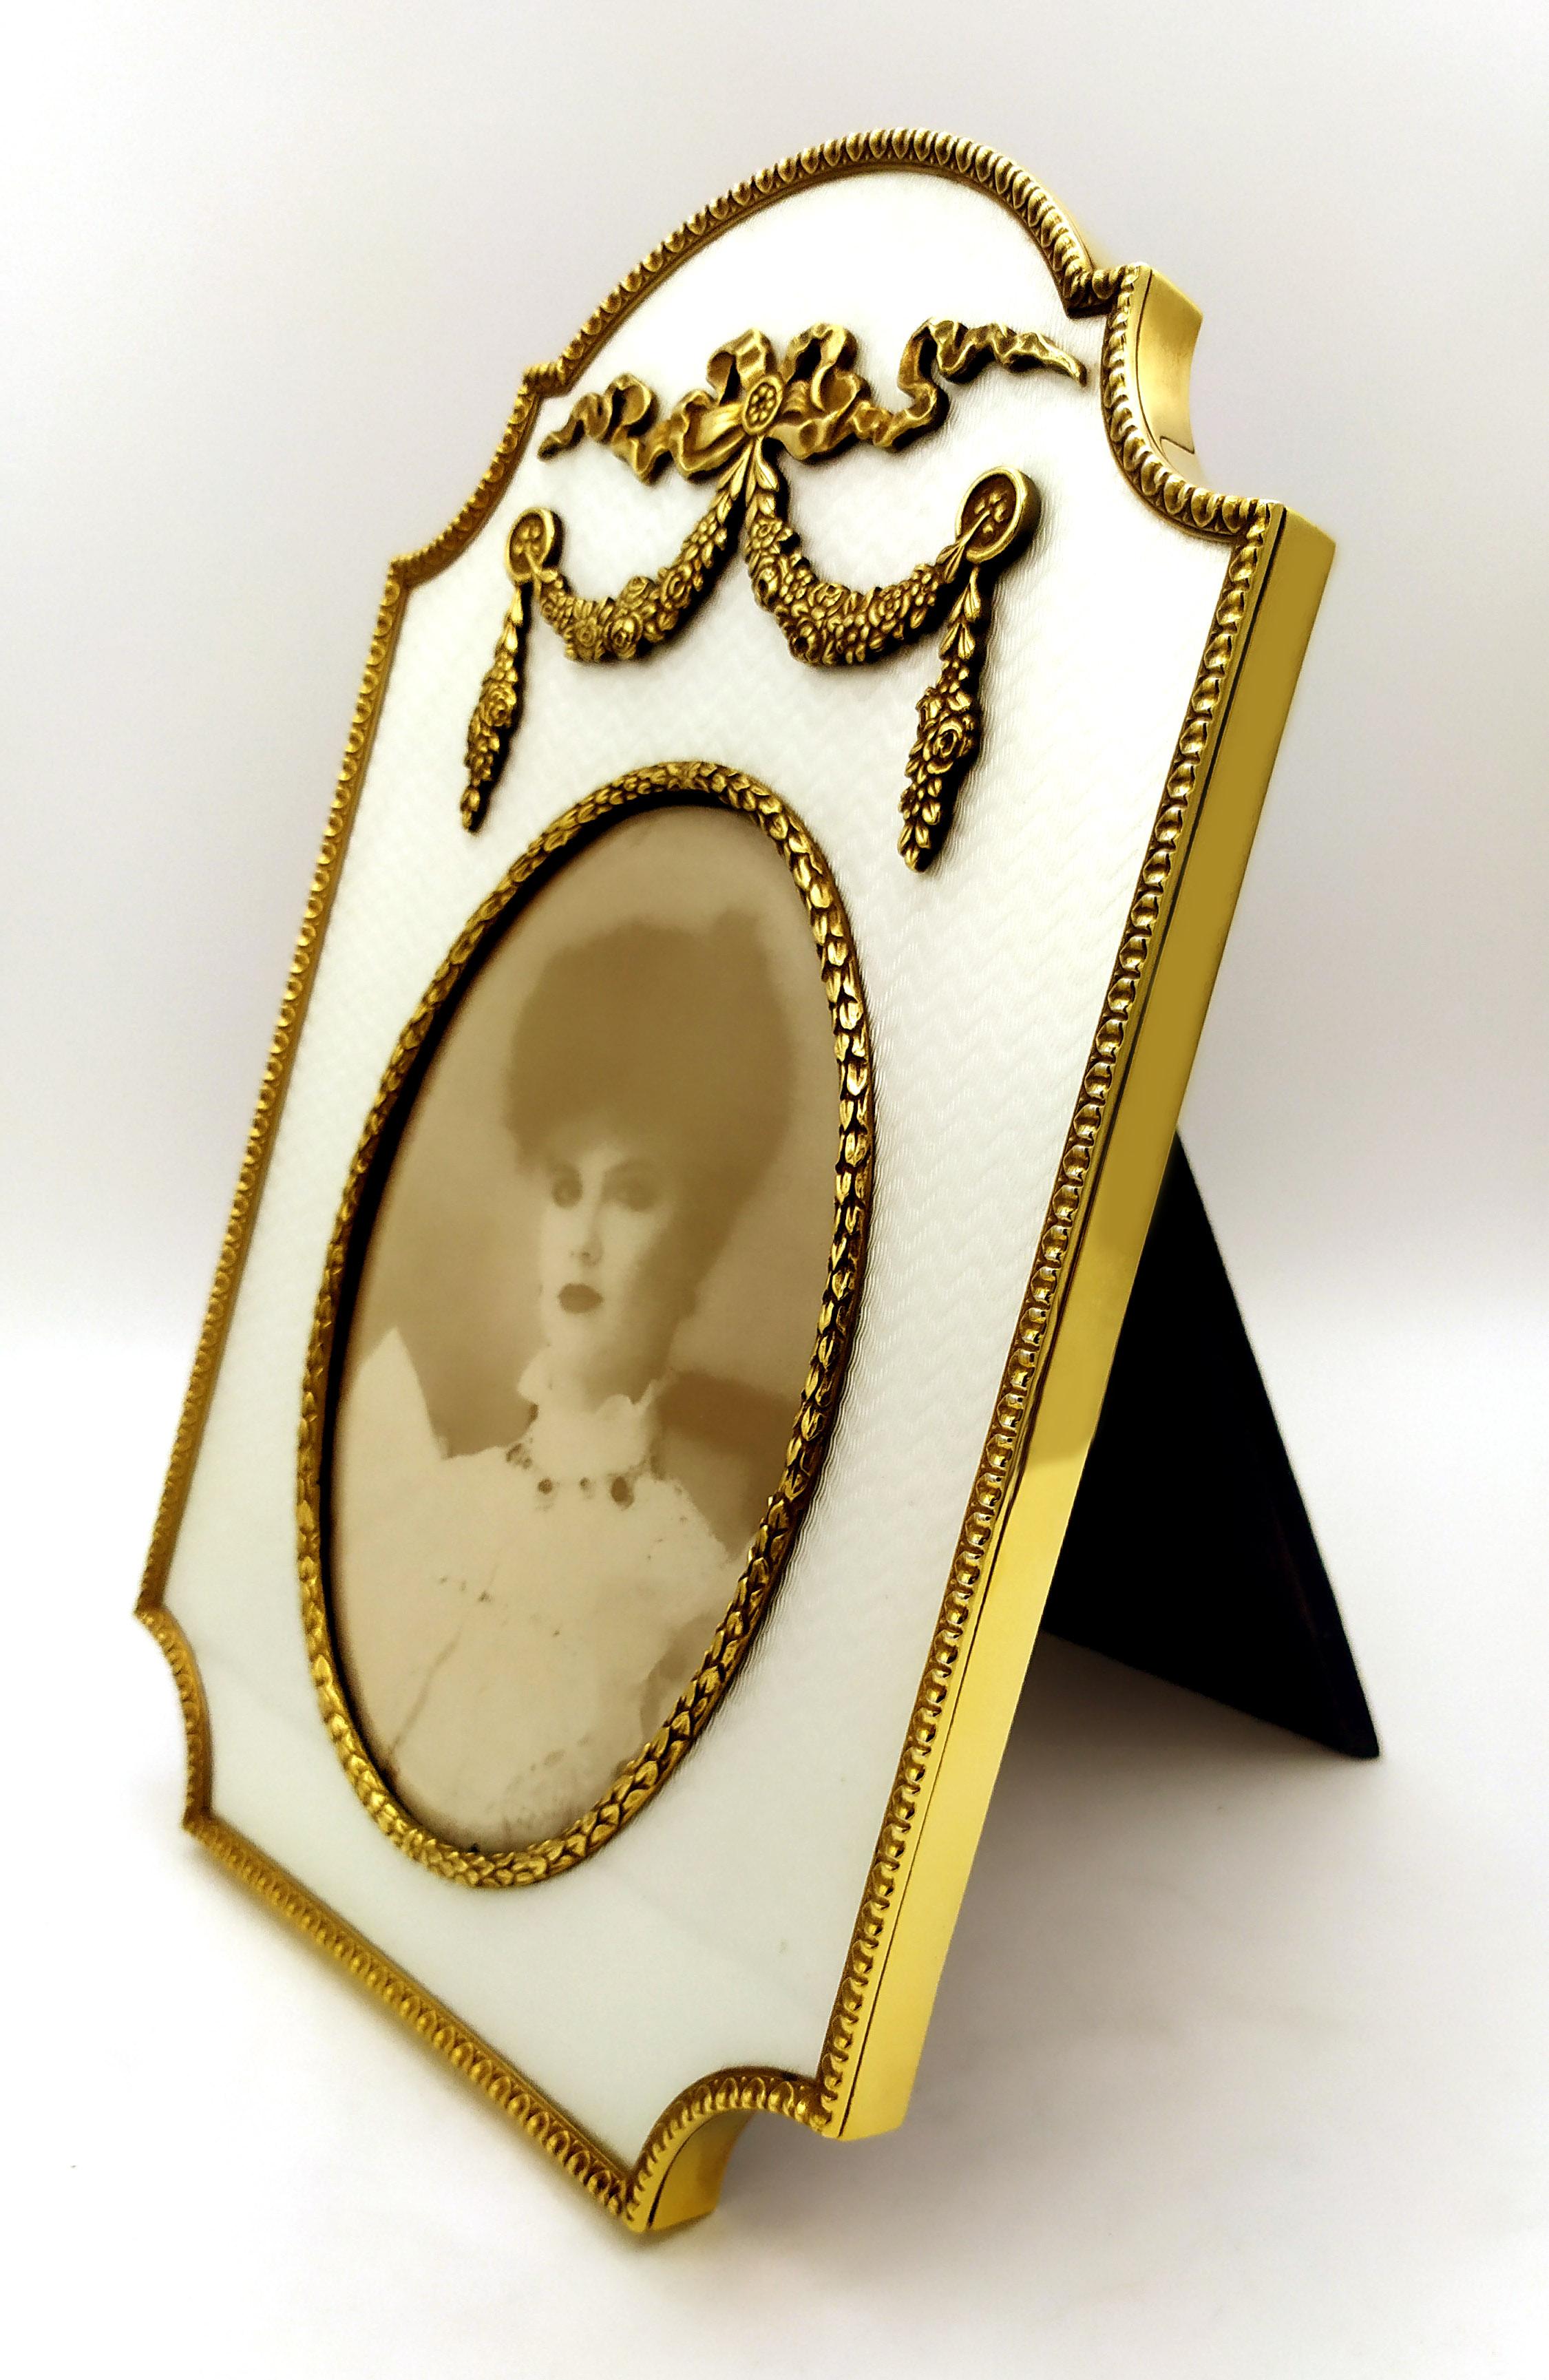 Empire Photograph Frame Large Imperial Style White Enamel on Sterling Silver Salimbeni For Sale